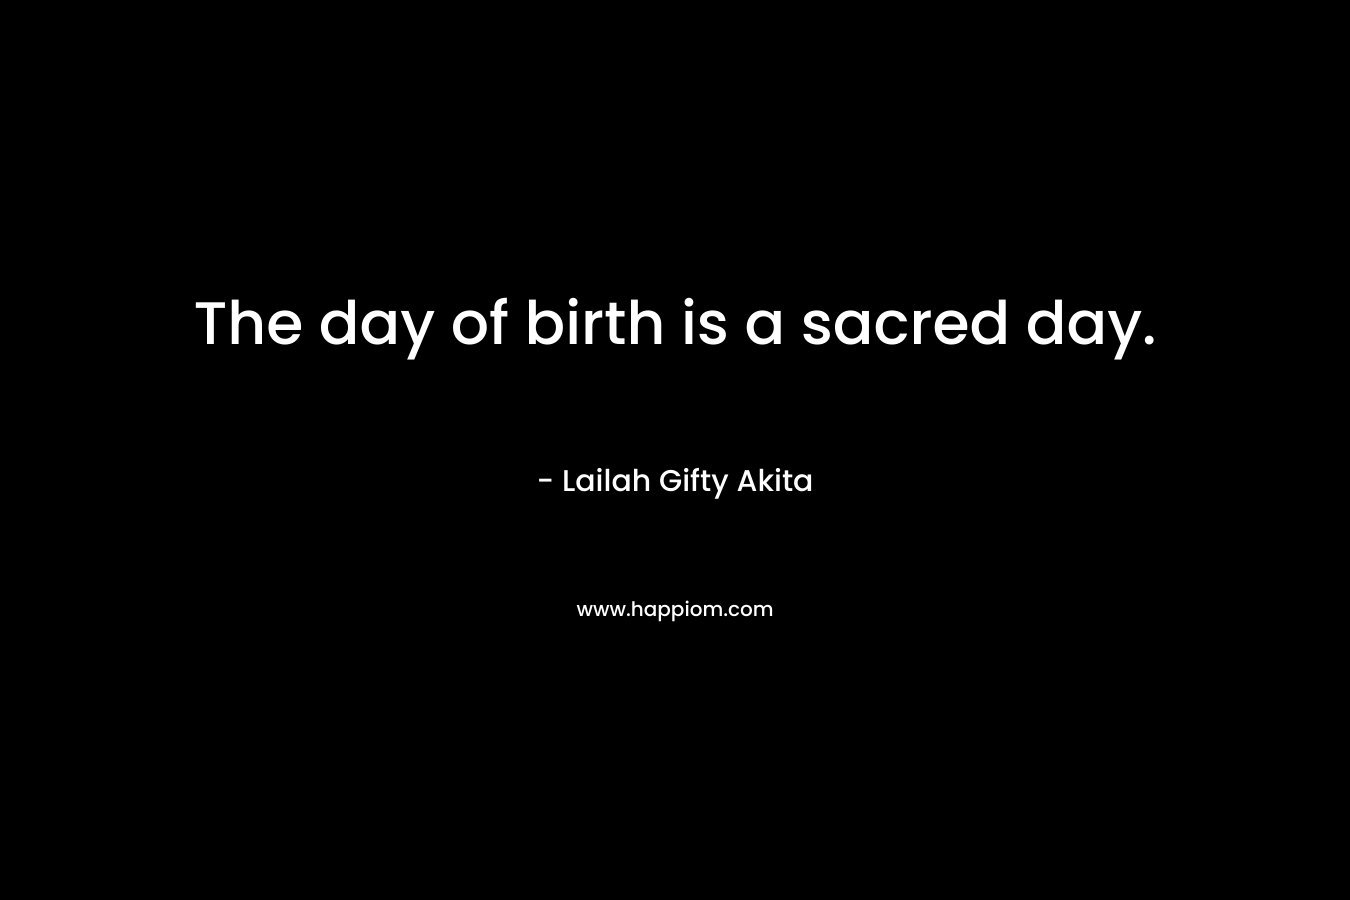 The day of birth is a sacred day.